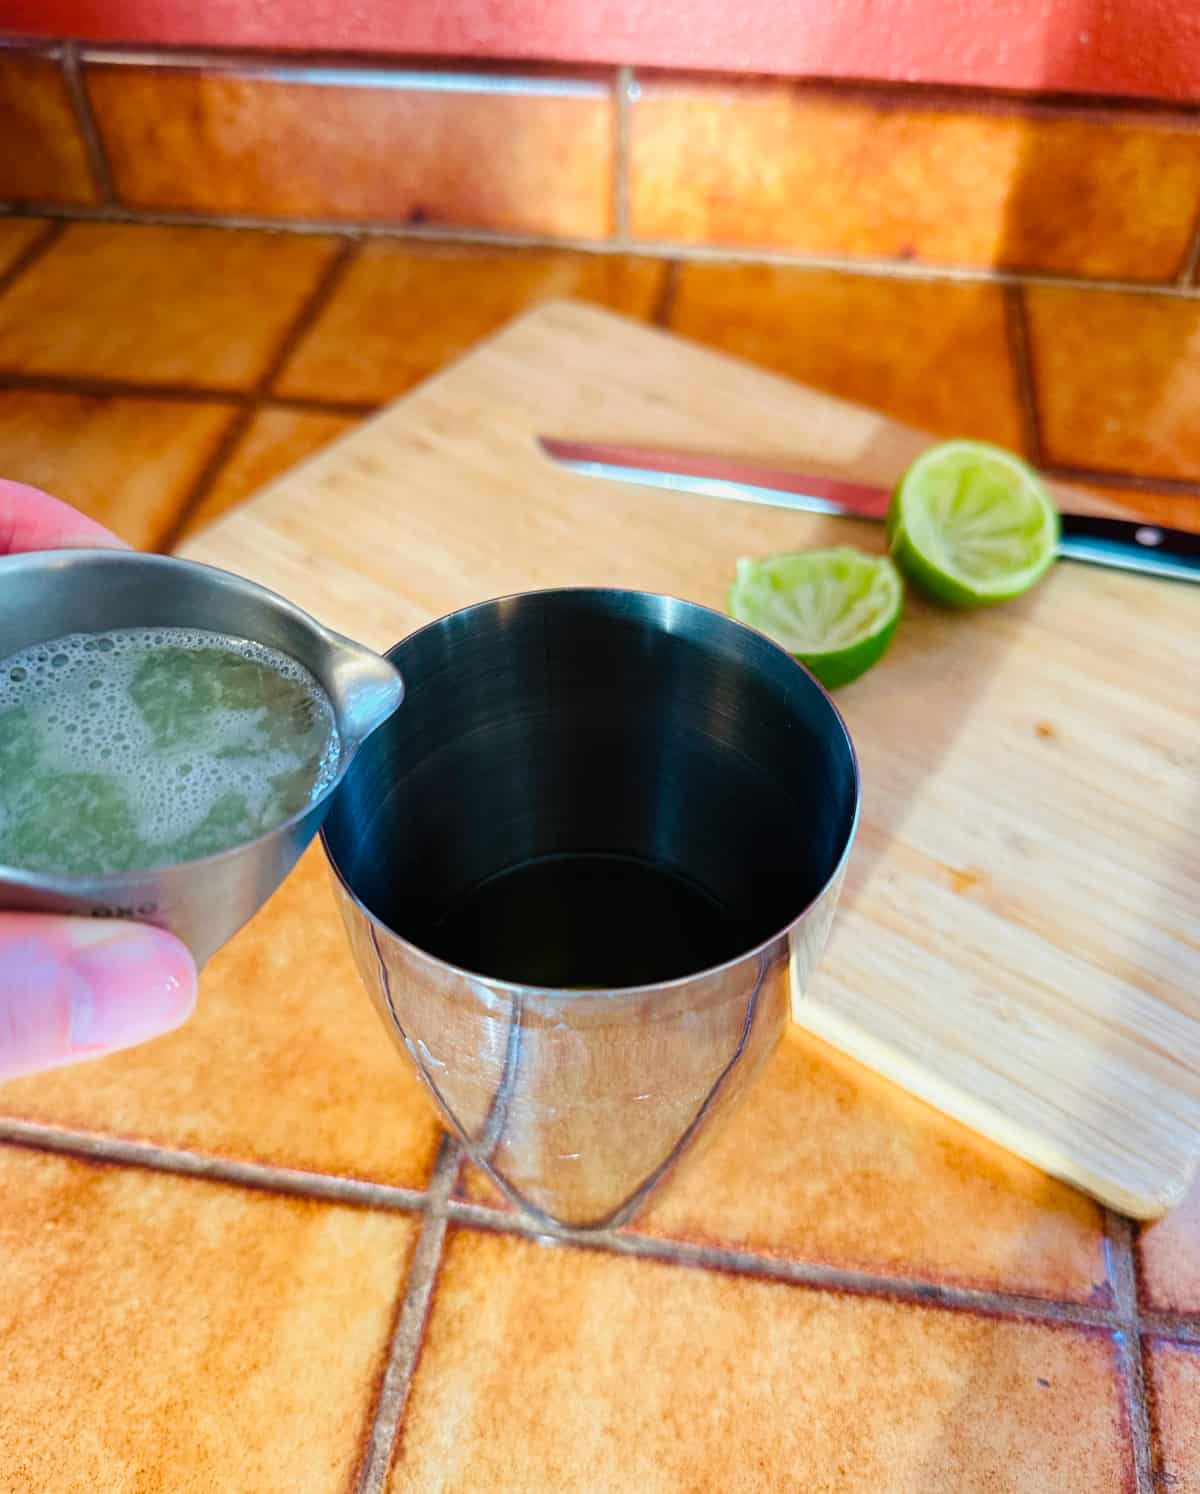 Pale green juice being poured from a steel measuring jigger into a cocktail shaker next to two halves of lime on a cutting board with a knife.